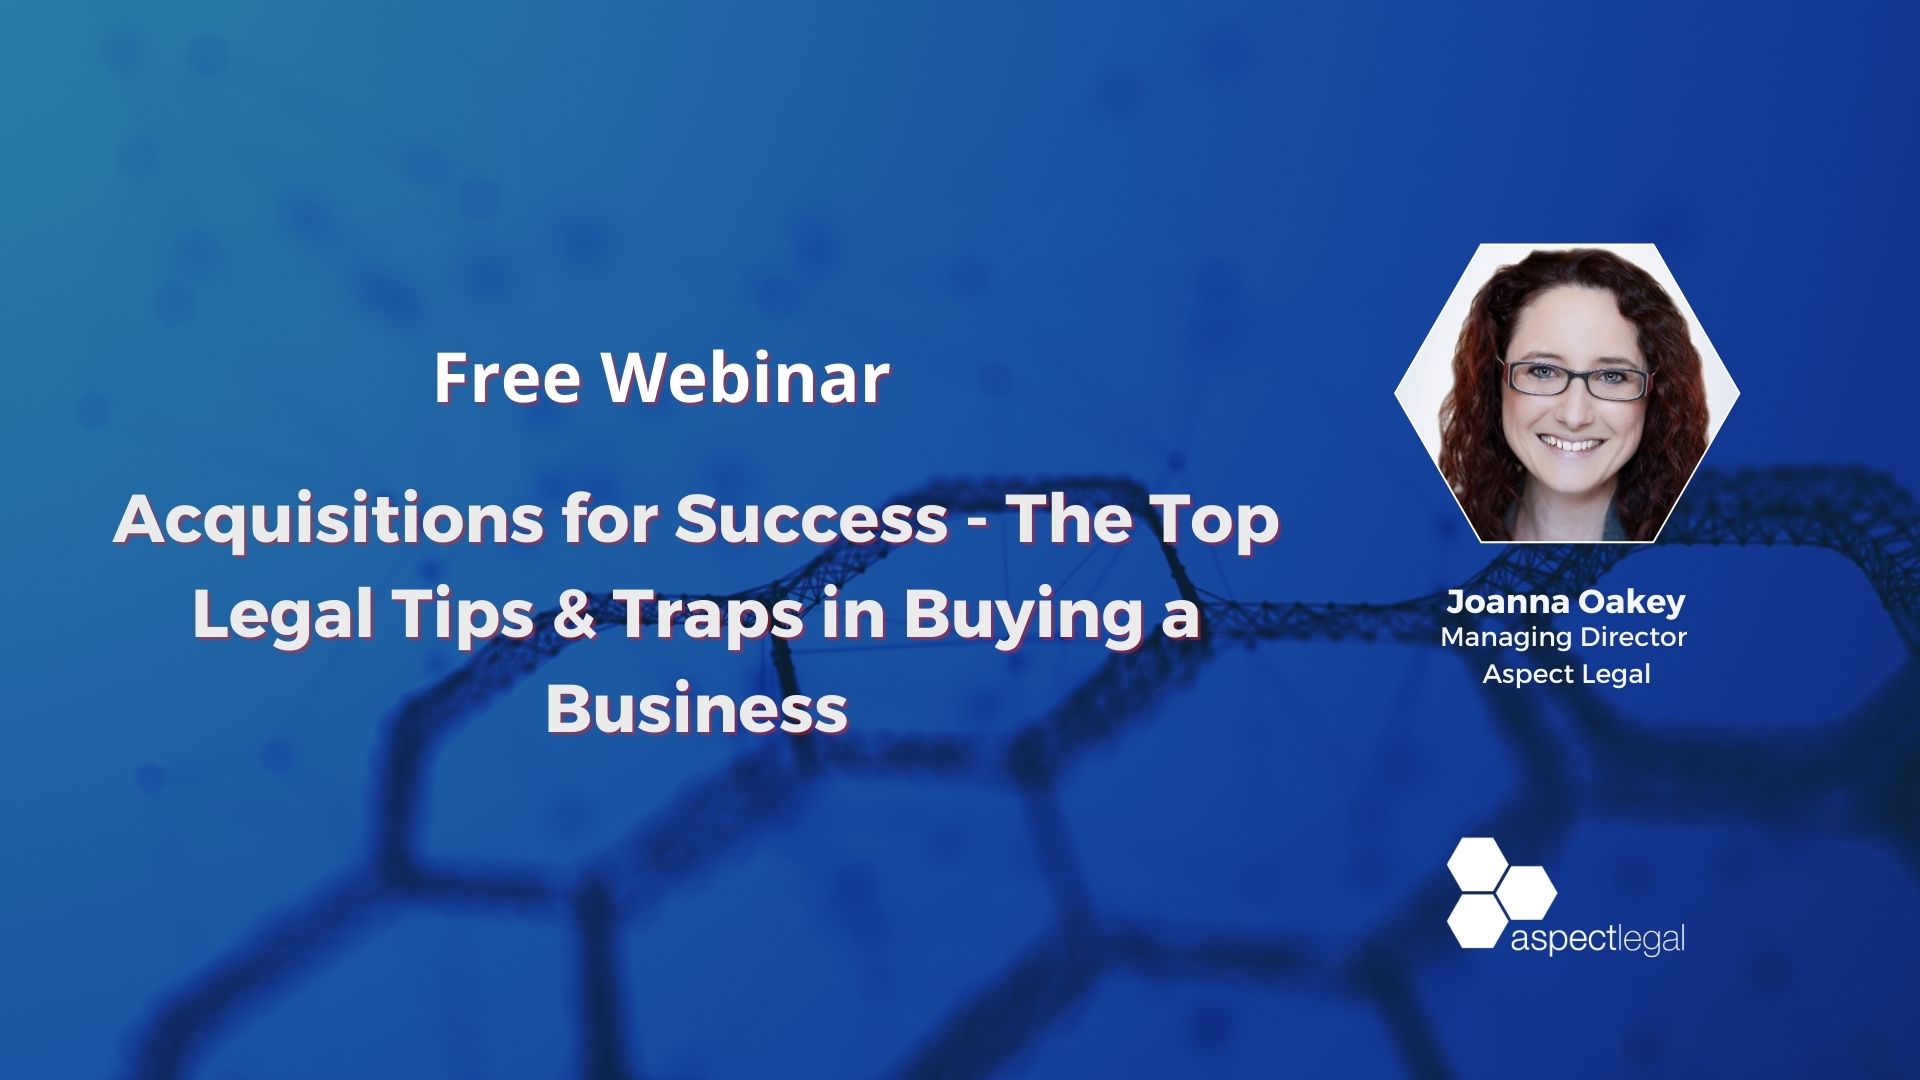 Acquisition for Success - Top Tips and Traps in Buying a Business